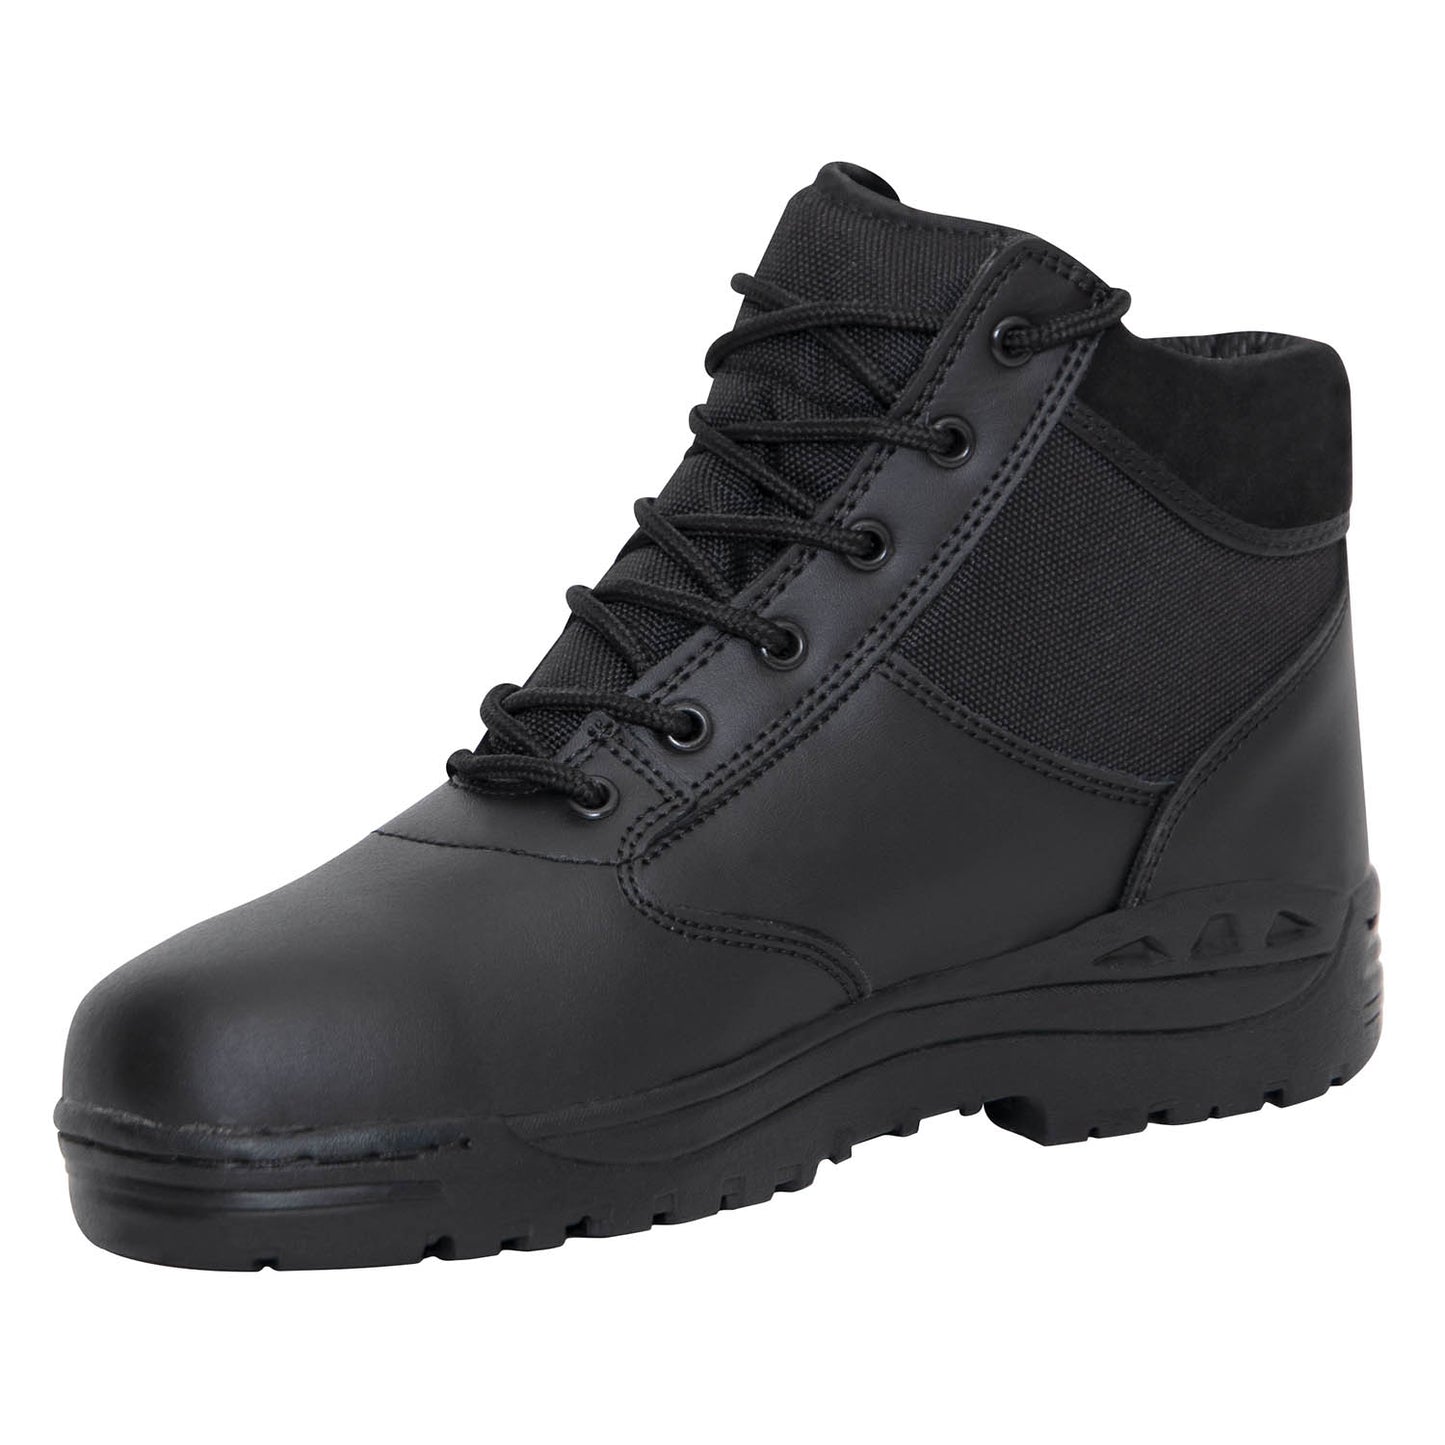 Rothco Forced Entry Security Boot   6 Inch